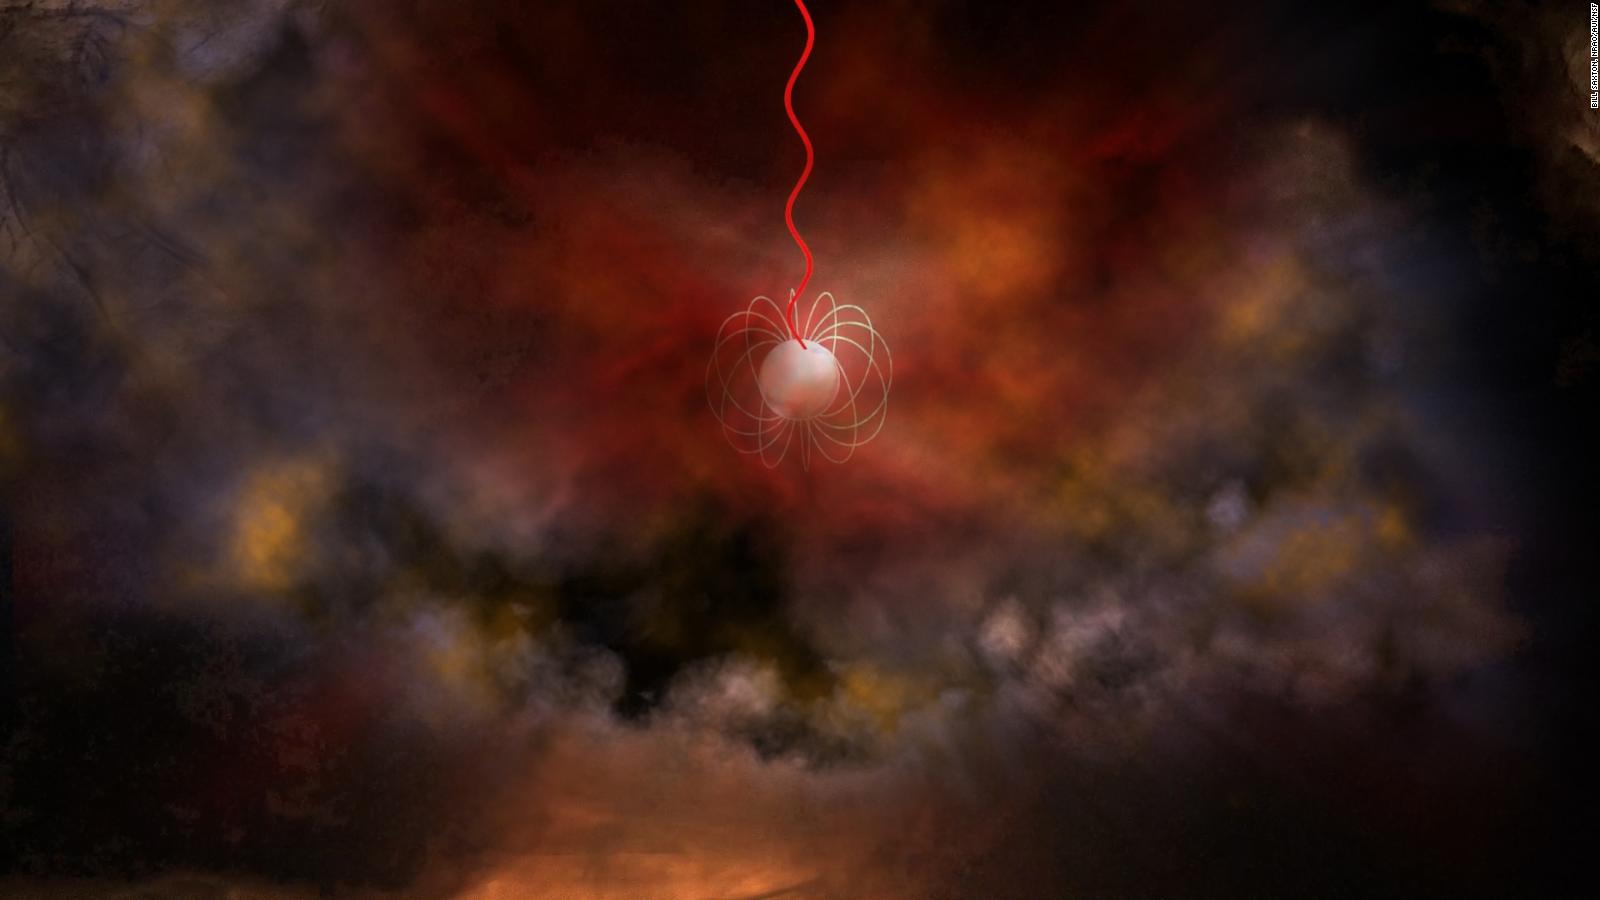 Astronomers have detected another rapid radio explosion